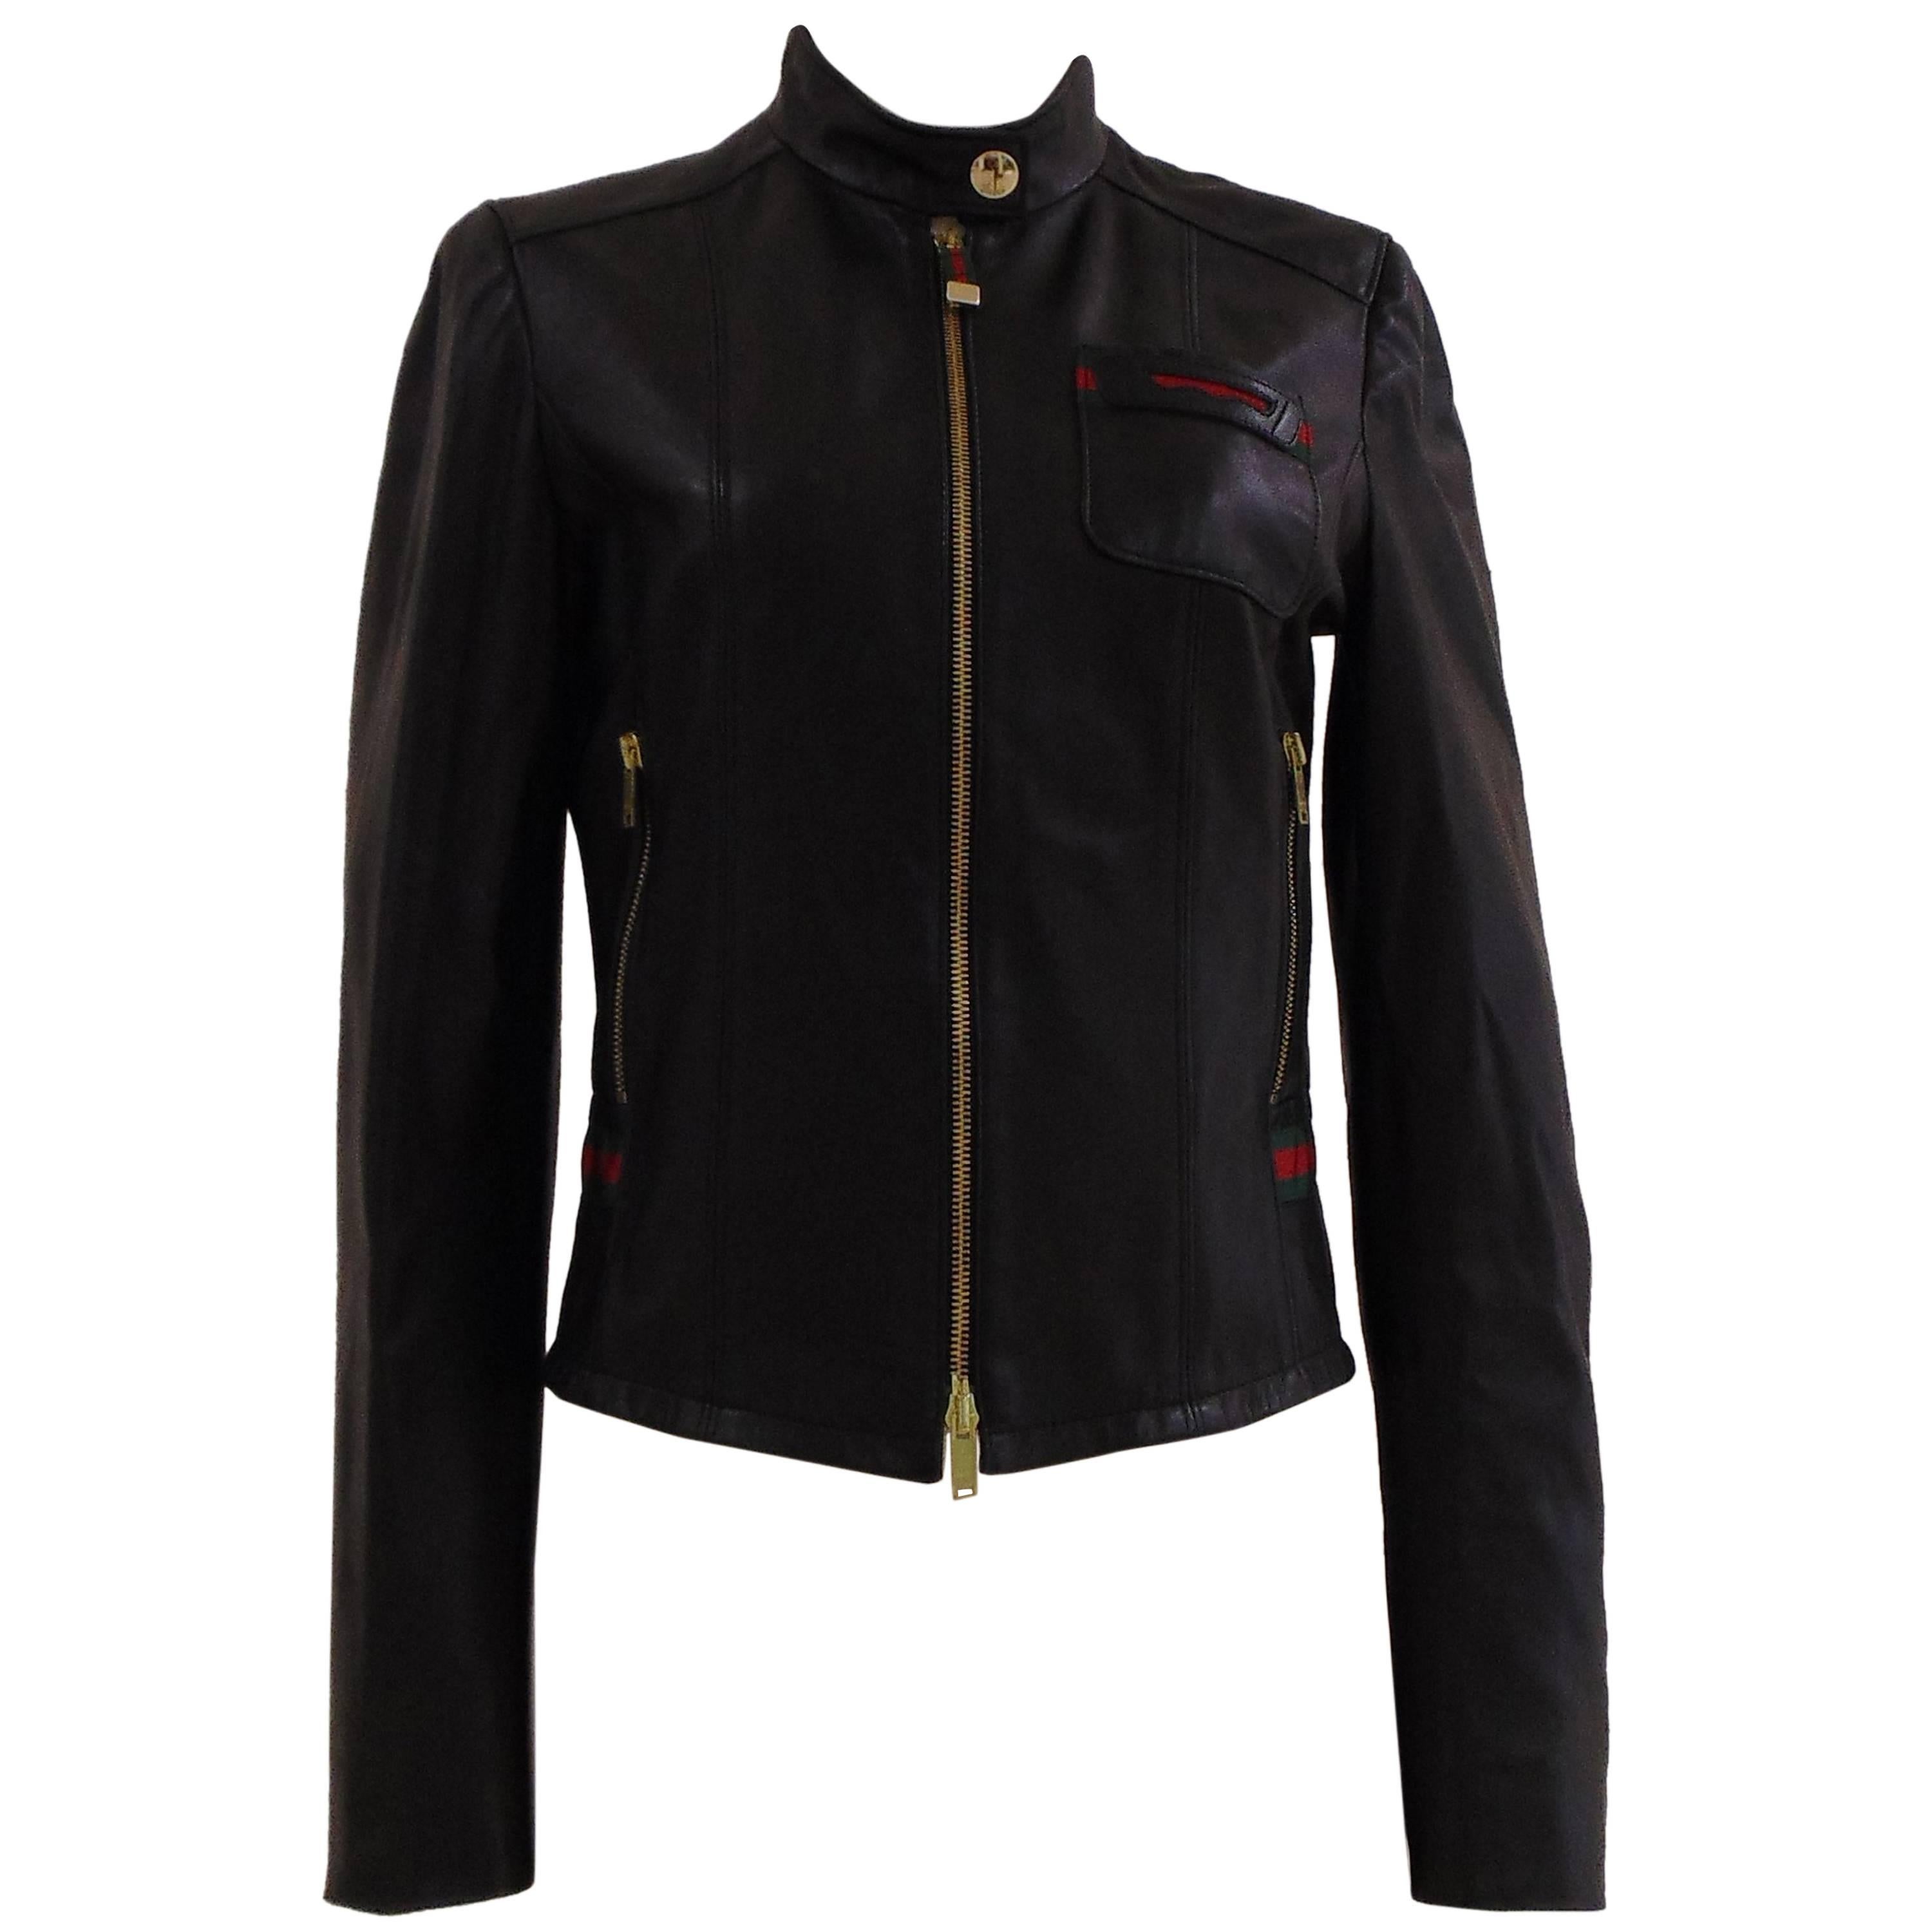 Gucci by Tom Ford black leather jacket